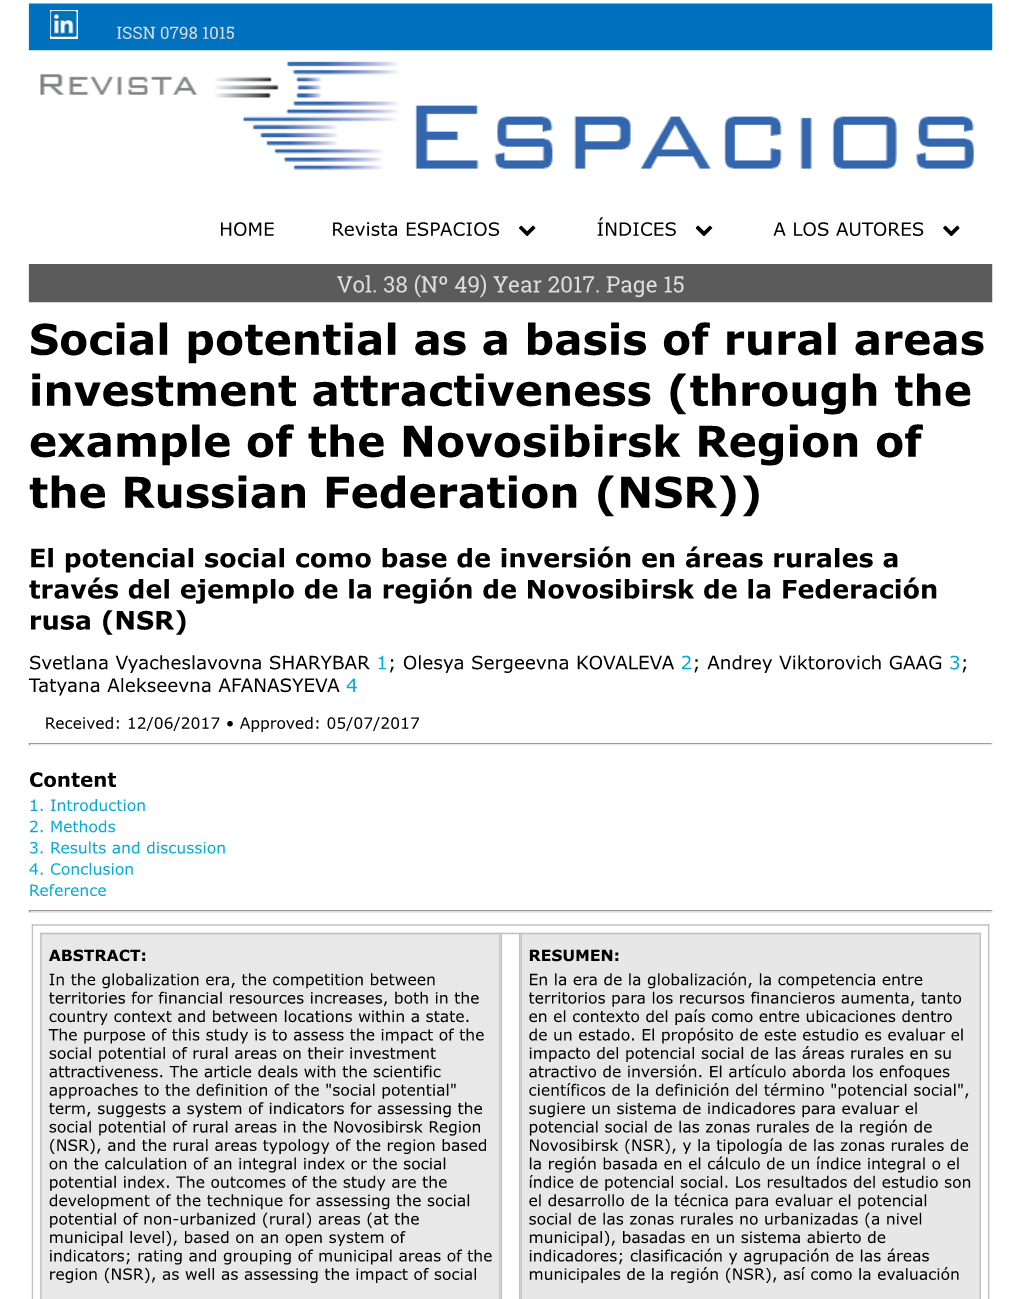 Social Potential As a Basis of Rural Areas Investment Attractiveness (Through the Example of the Novosibirsk Region of the Russian Federation (NSR))